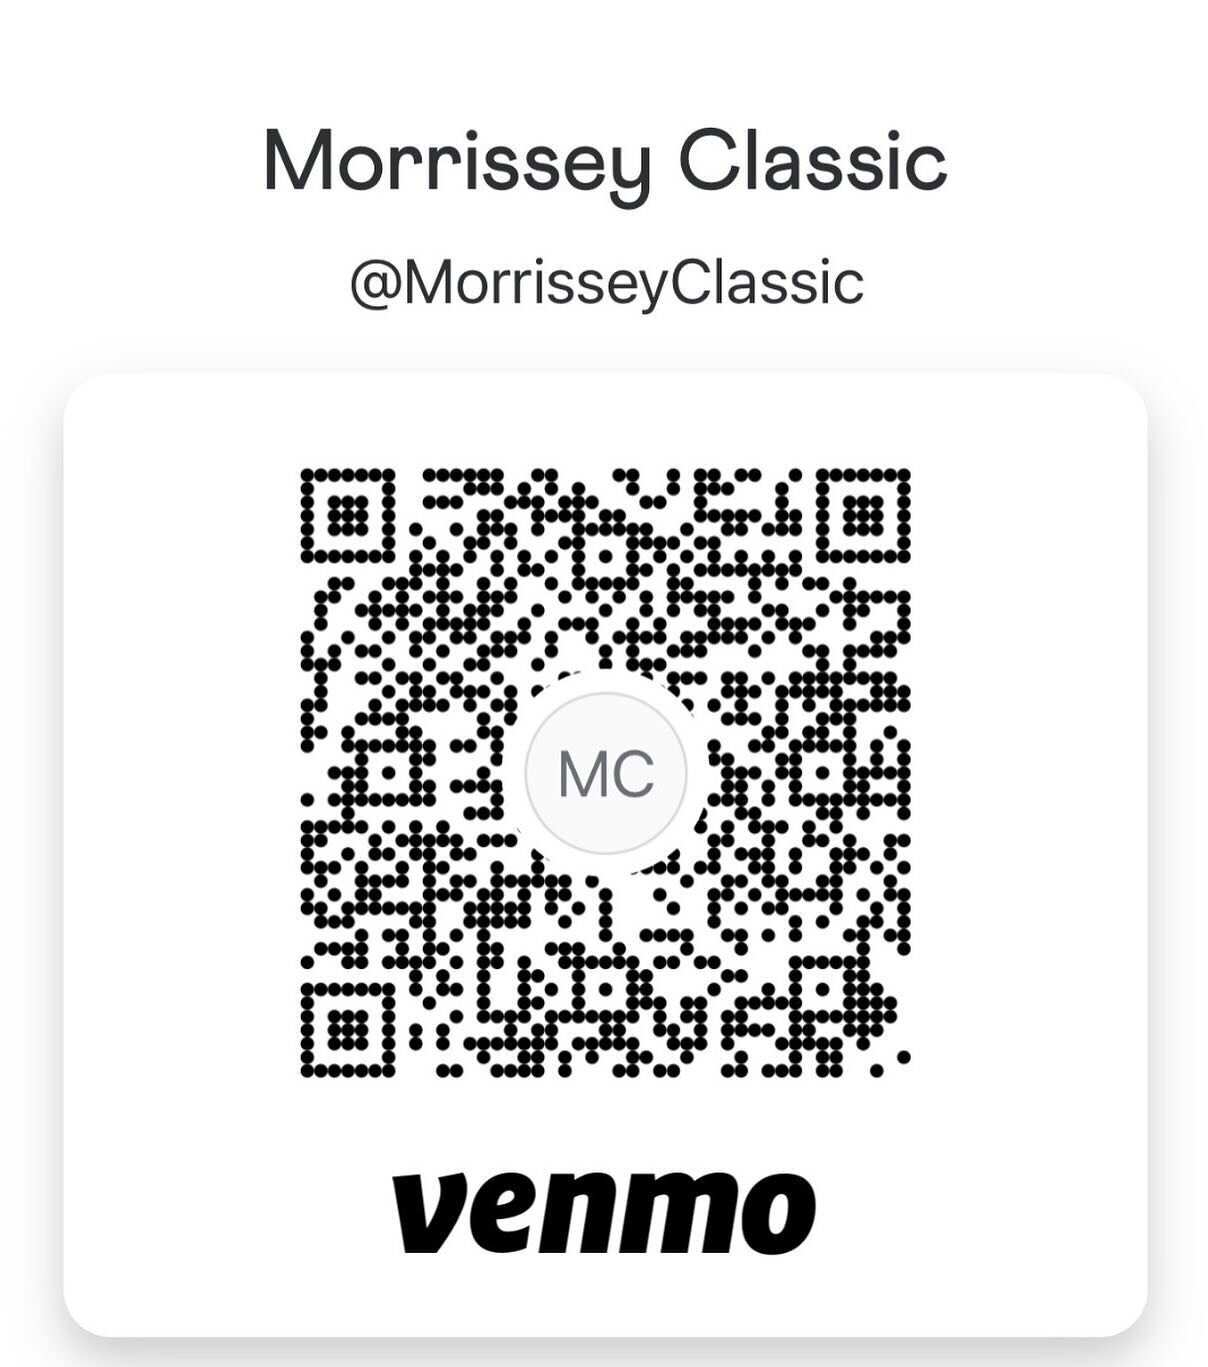 The 2023 Morrissey Classic Admission Costs can be paid for, in advance, via Venmo. Please keep a copy of your receipt as proof of purchase. We will also accept cash and Venmo at the doors.
Weekend Family Pass: $30 (6 people max); Daily Family Pass: $